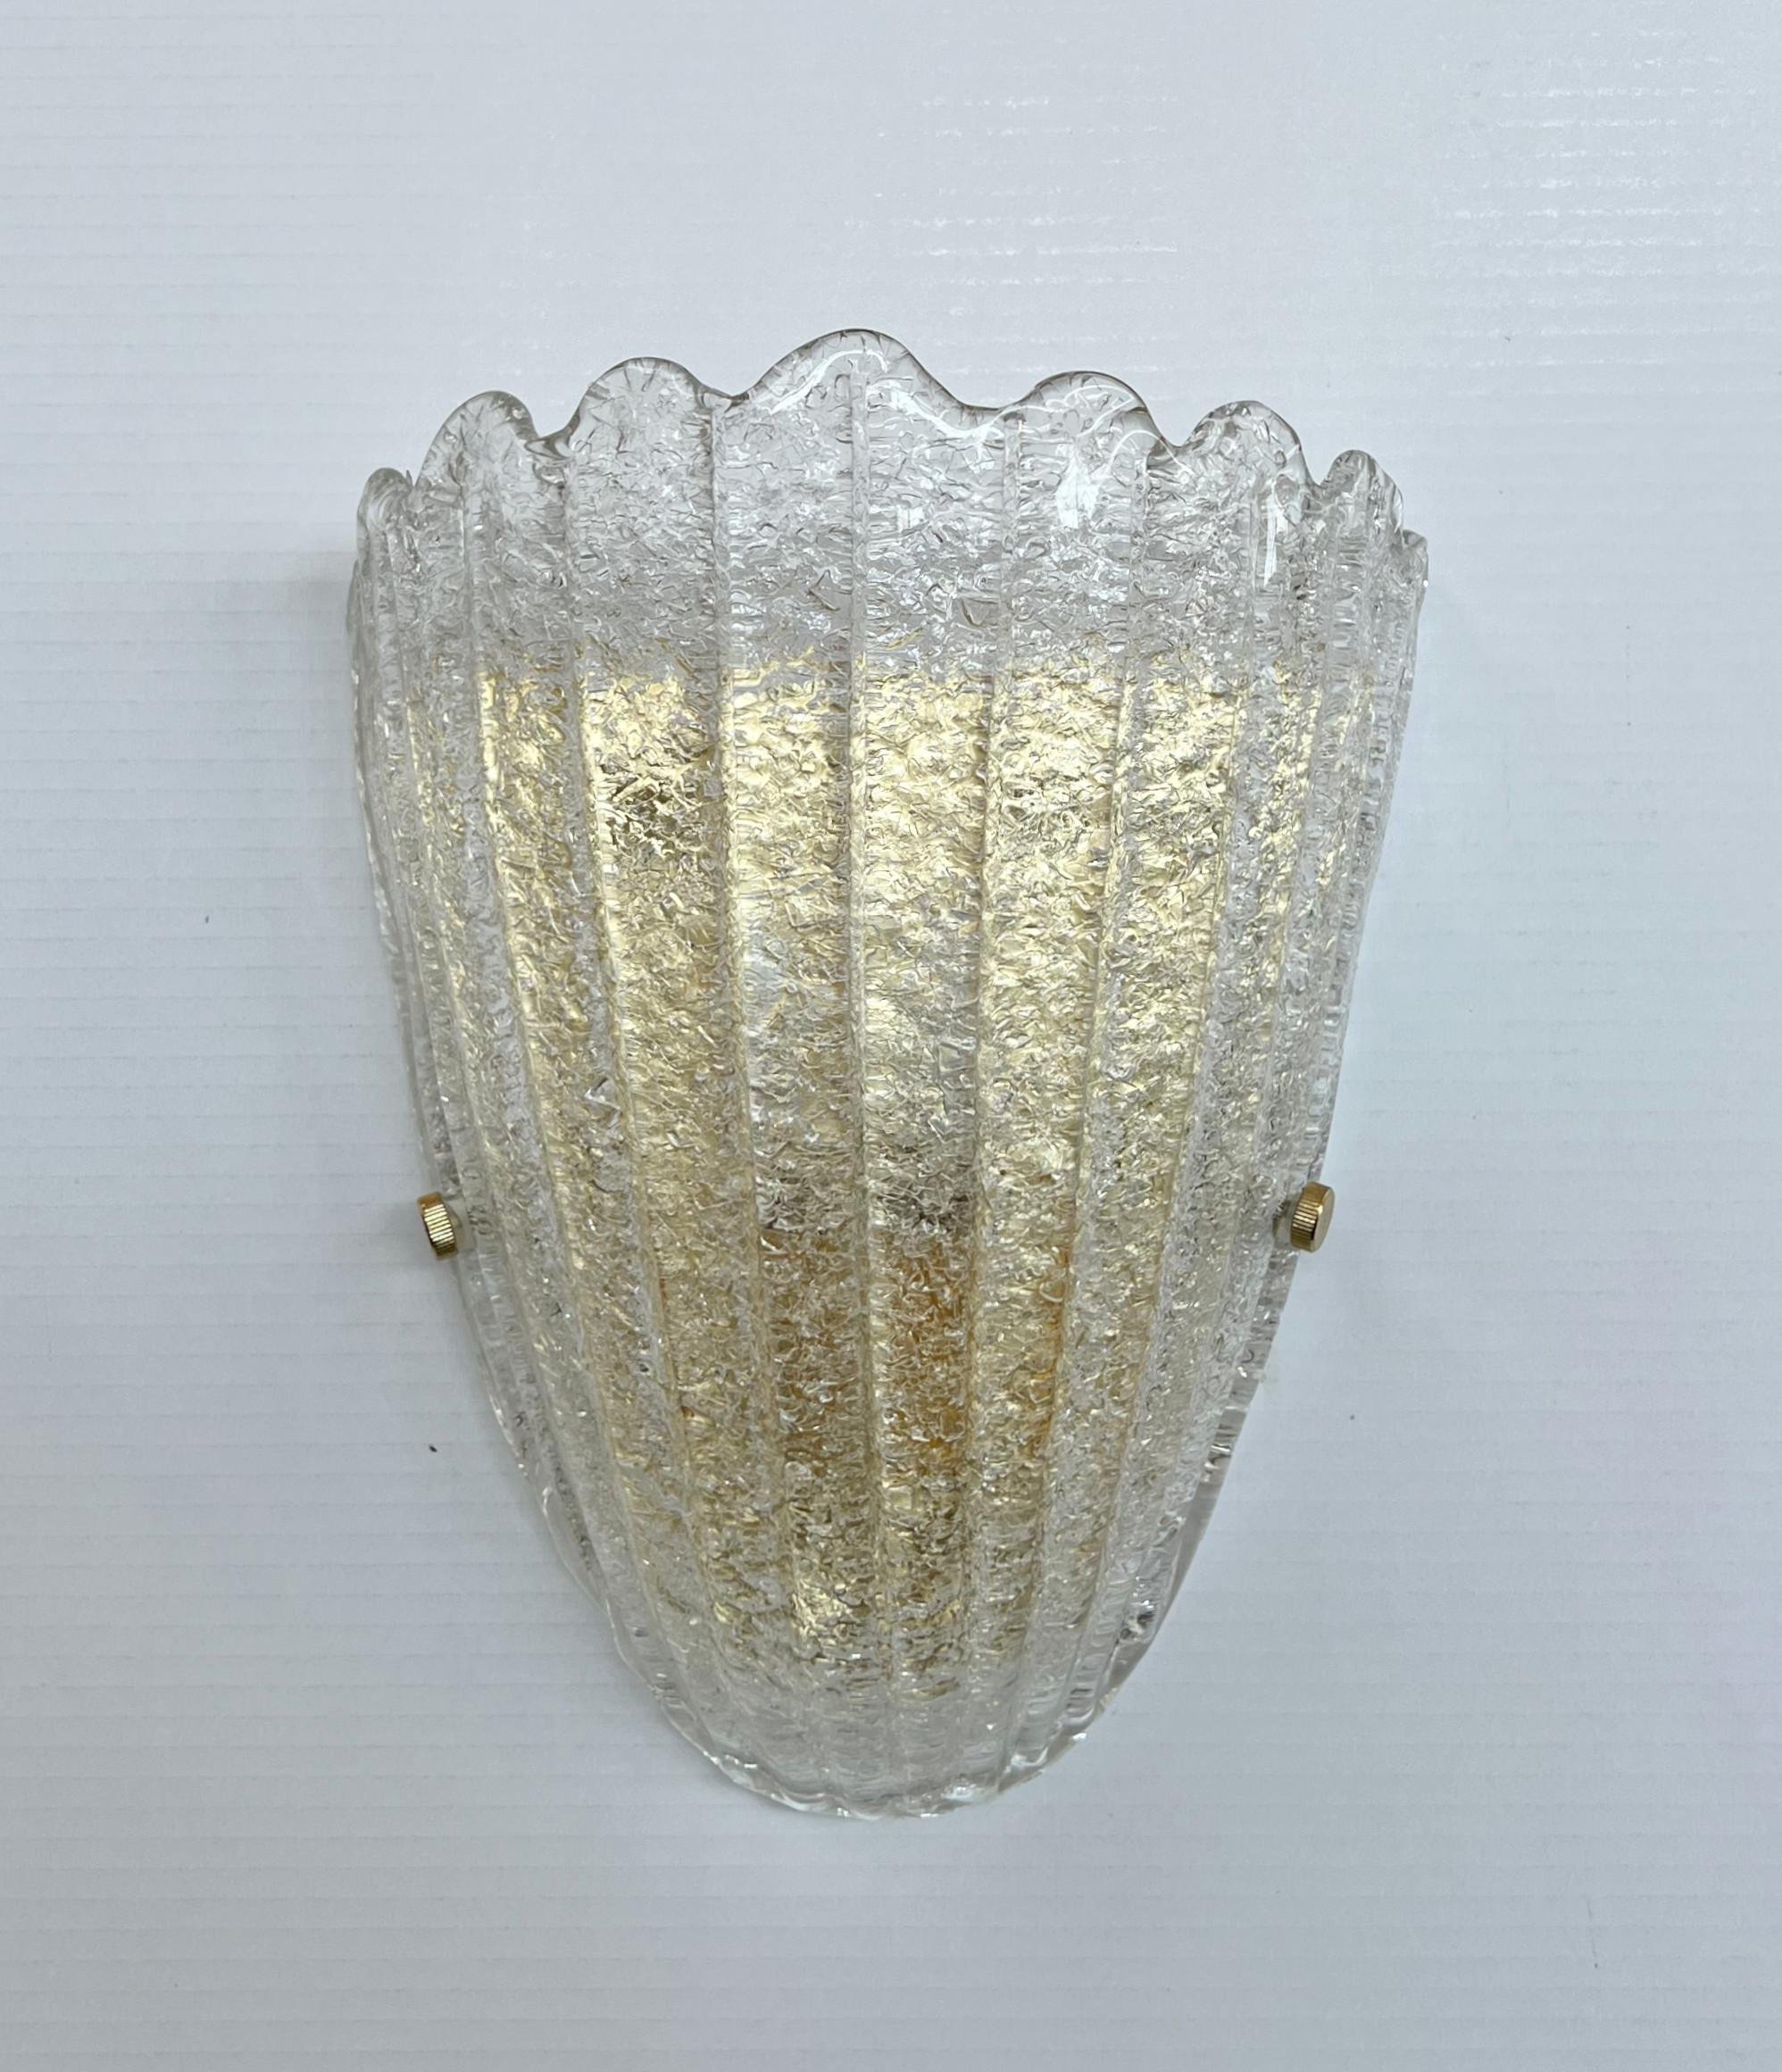 Italian wall light with a Murano glass shield hand blown in Graniglia technique to produce granular textured effect, mounted on gold plated finish frame / Made in Italy
Measures: Height 12 inches, width 9 inches, depth 4 inches
1 light / E26 or E27